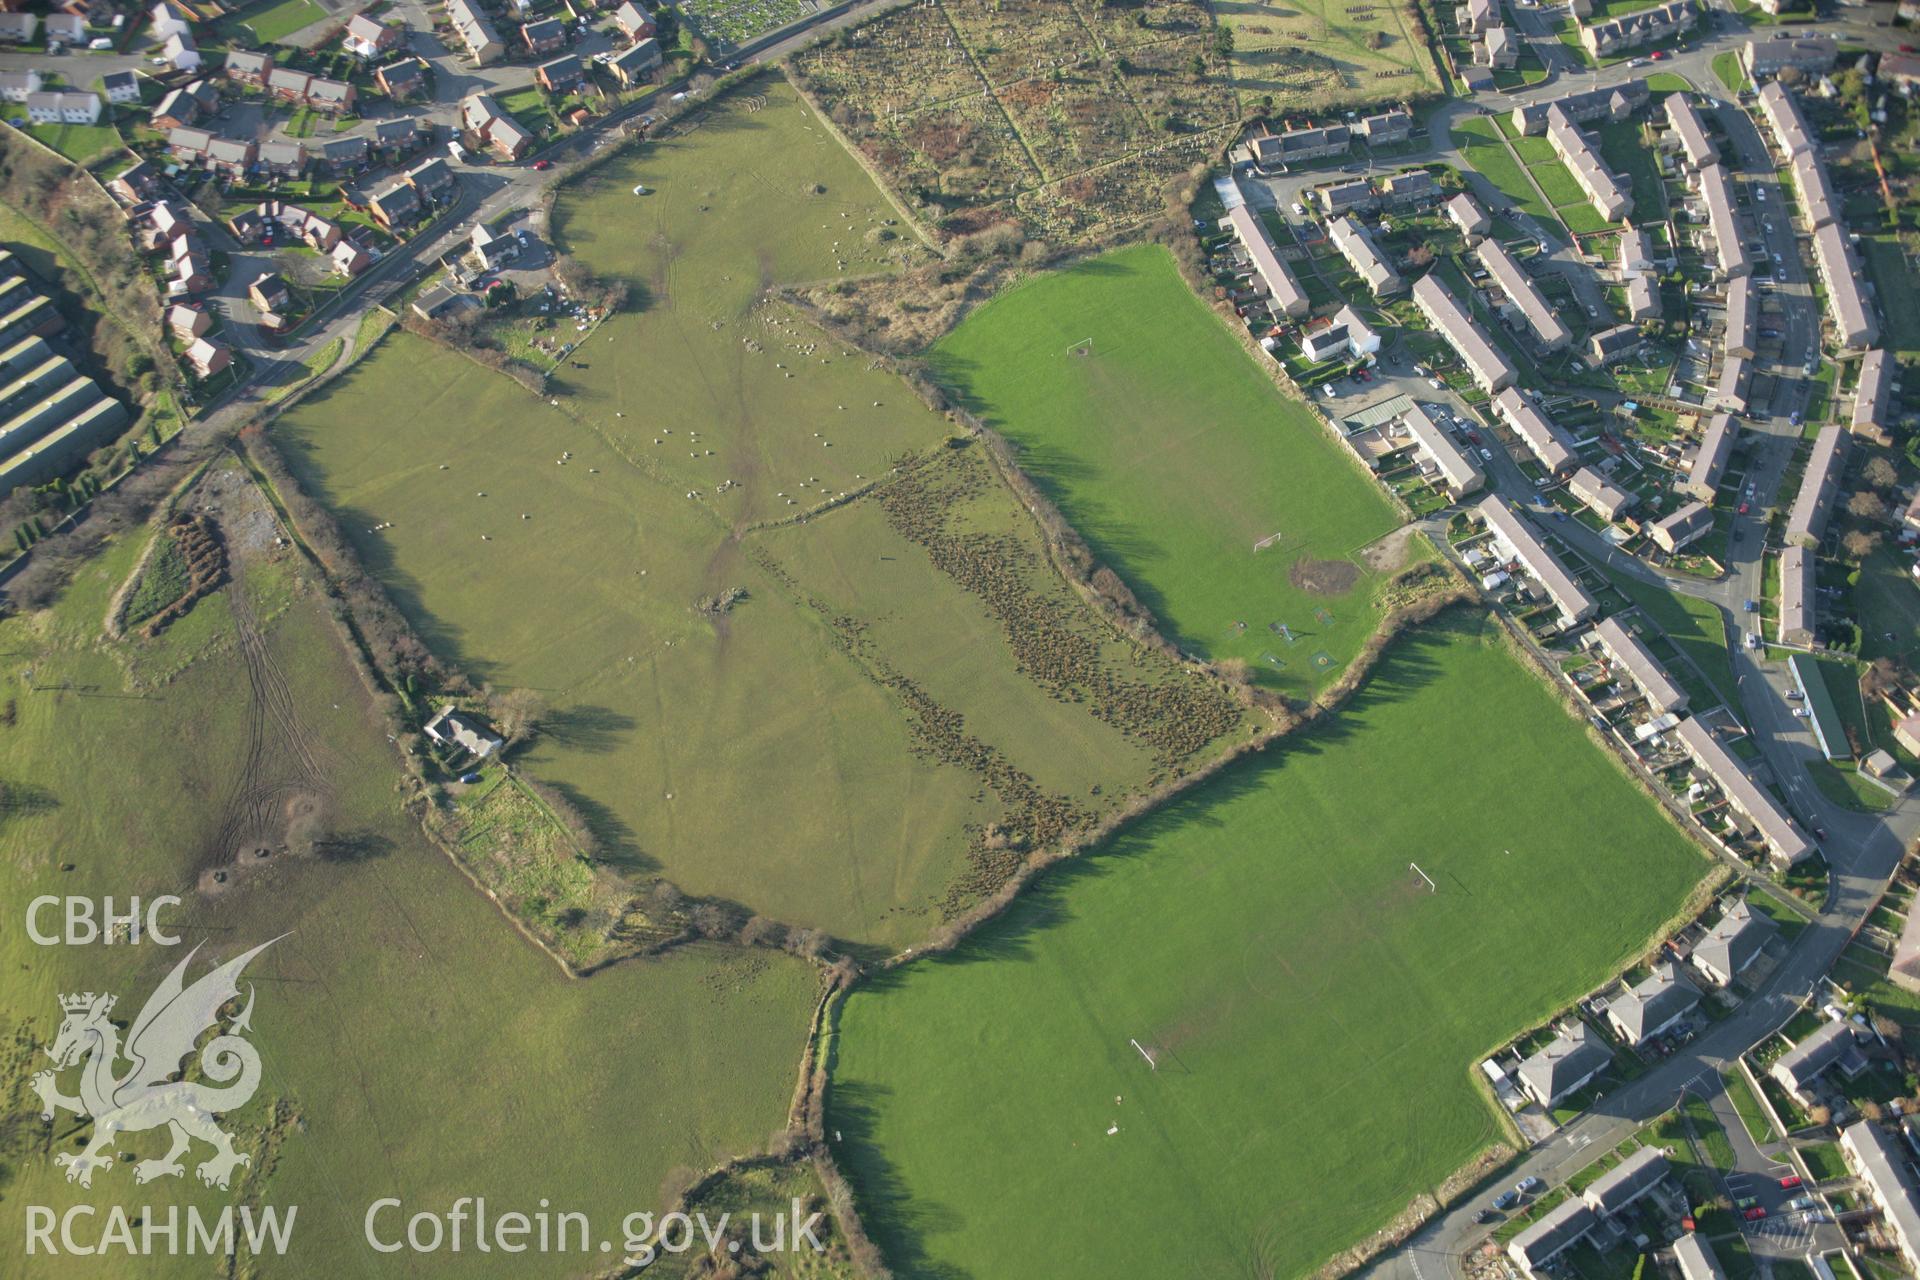 RCAHMW colour oblique aerial photograph of the Tyddyn Pandy Square Barrow Cemetery. Taken on 25 January 2007 by Toby Driver